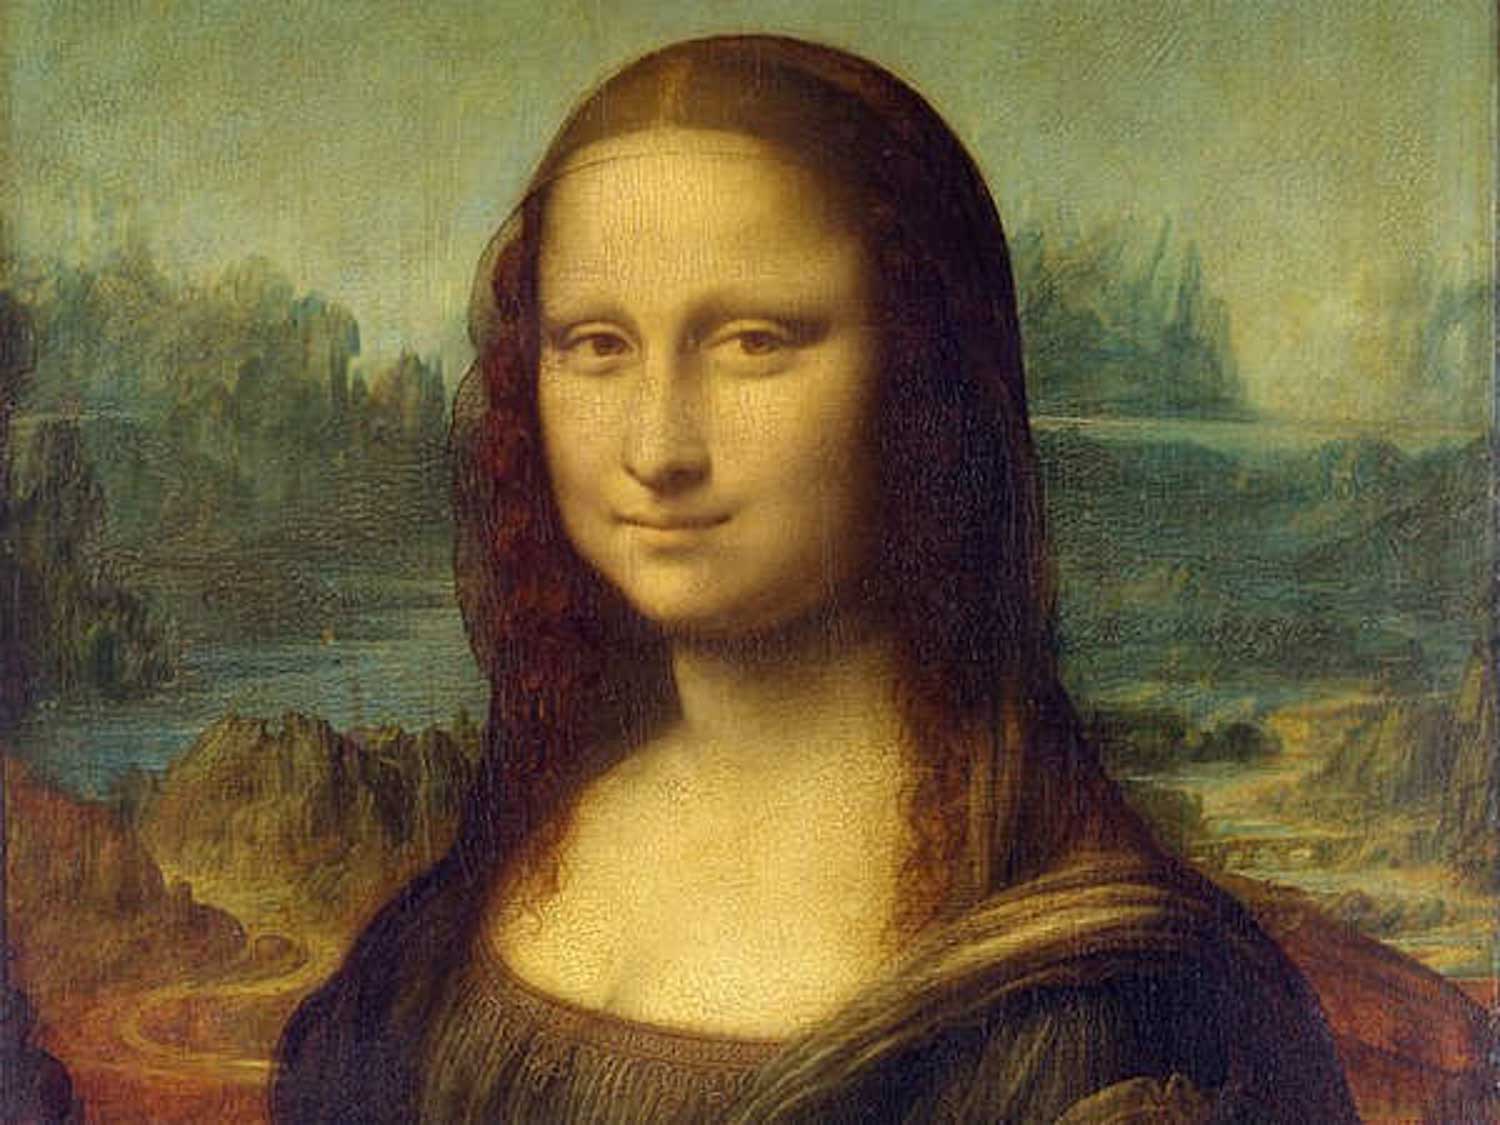 The Hidden History of the Mona Lisa: Secrets, Theft, and Artistic Genius